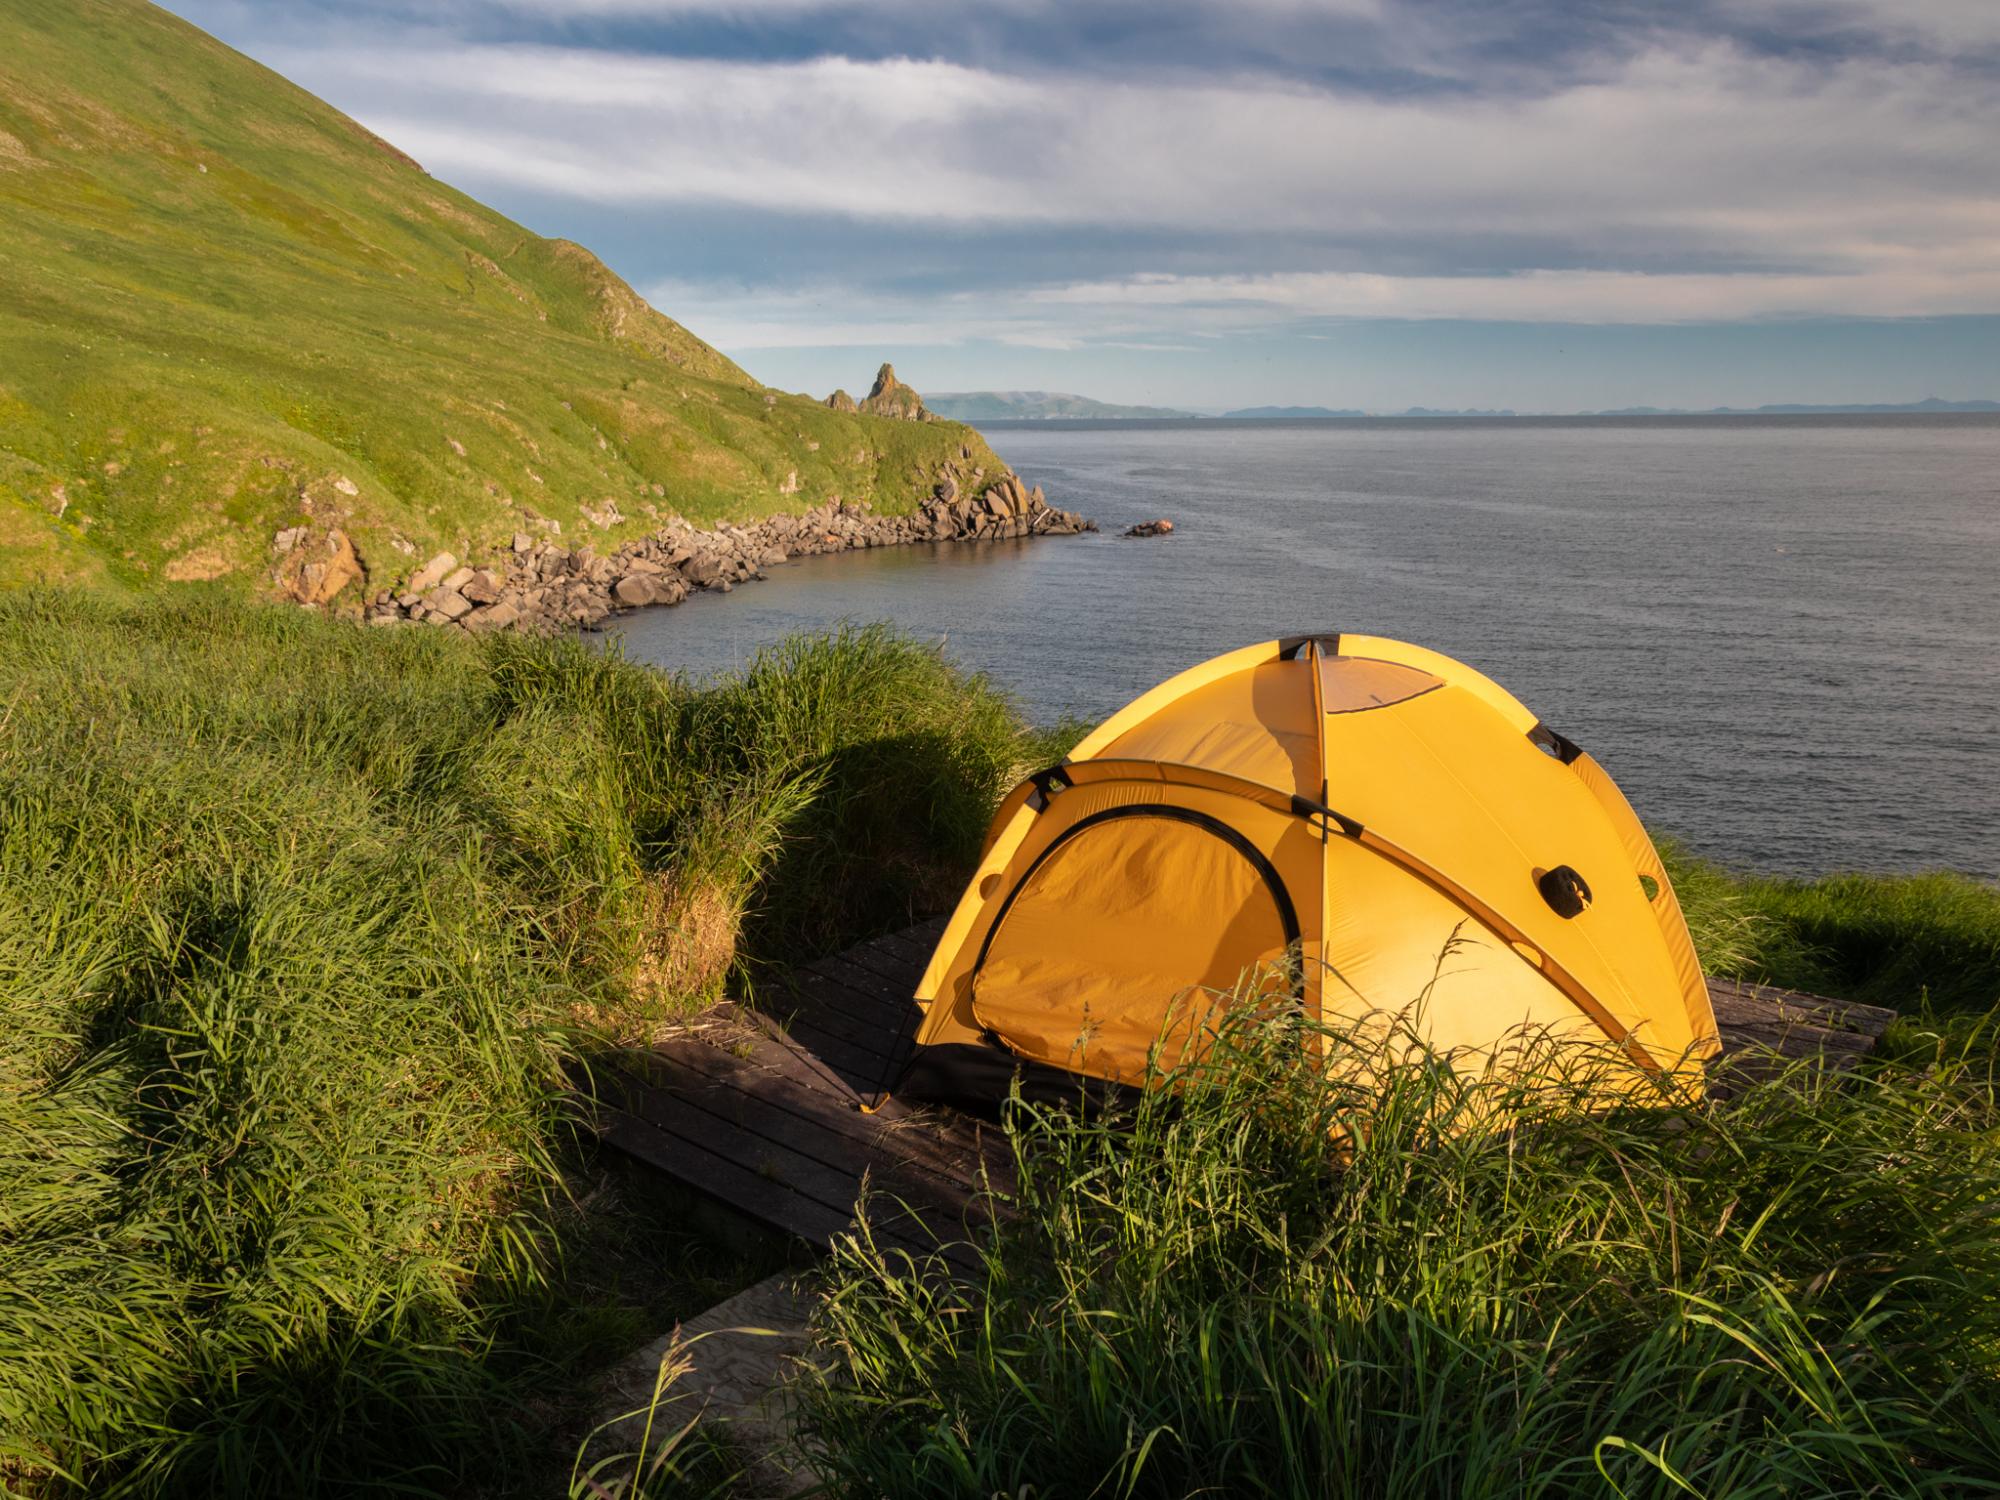 There are eight campsites on Round Island, each with a stellar view and a firm platform to anchor a tent.